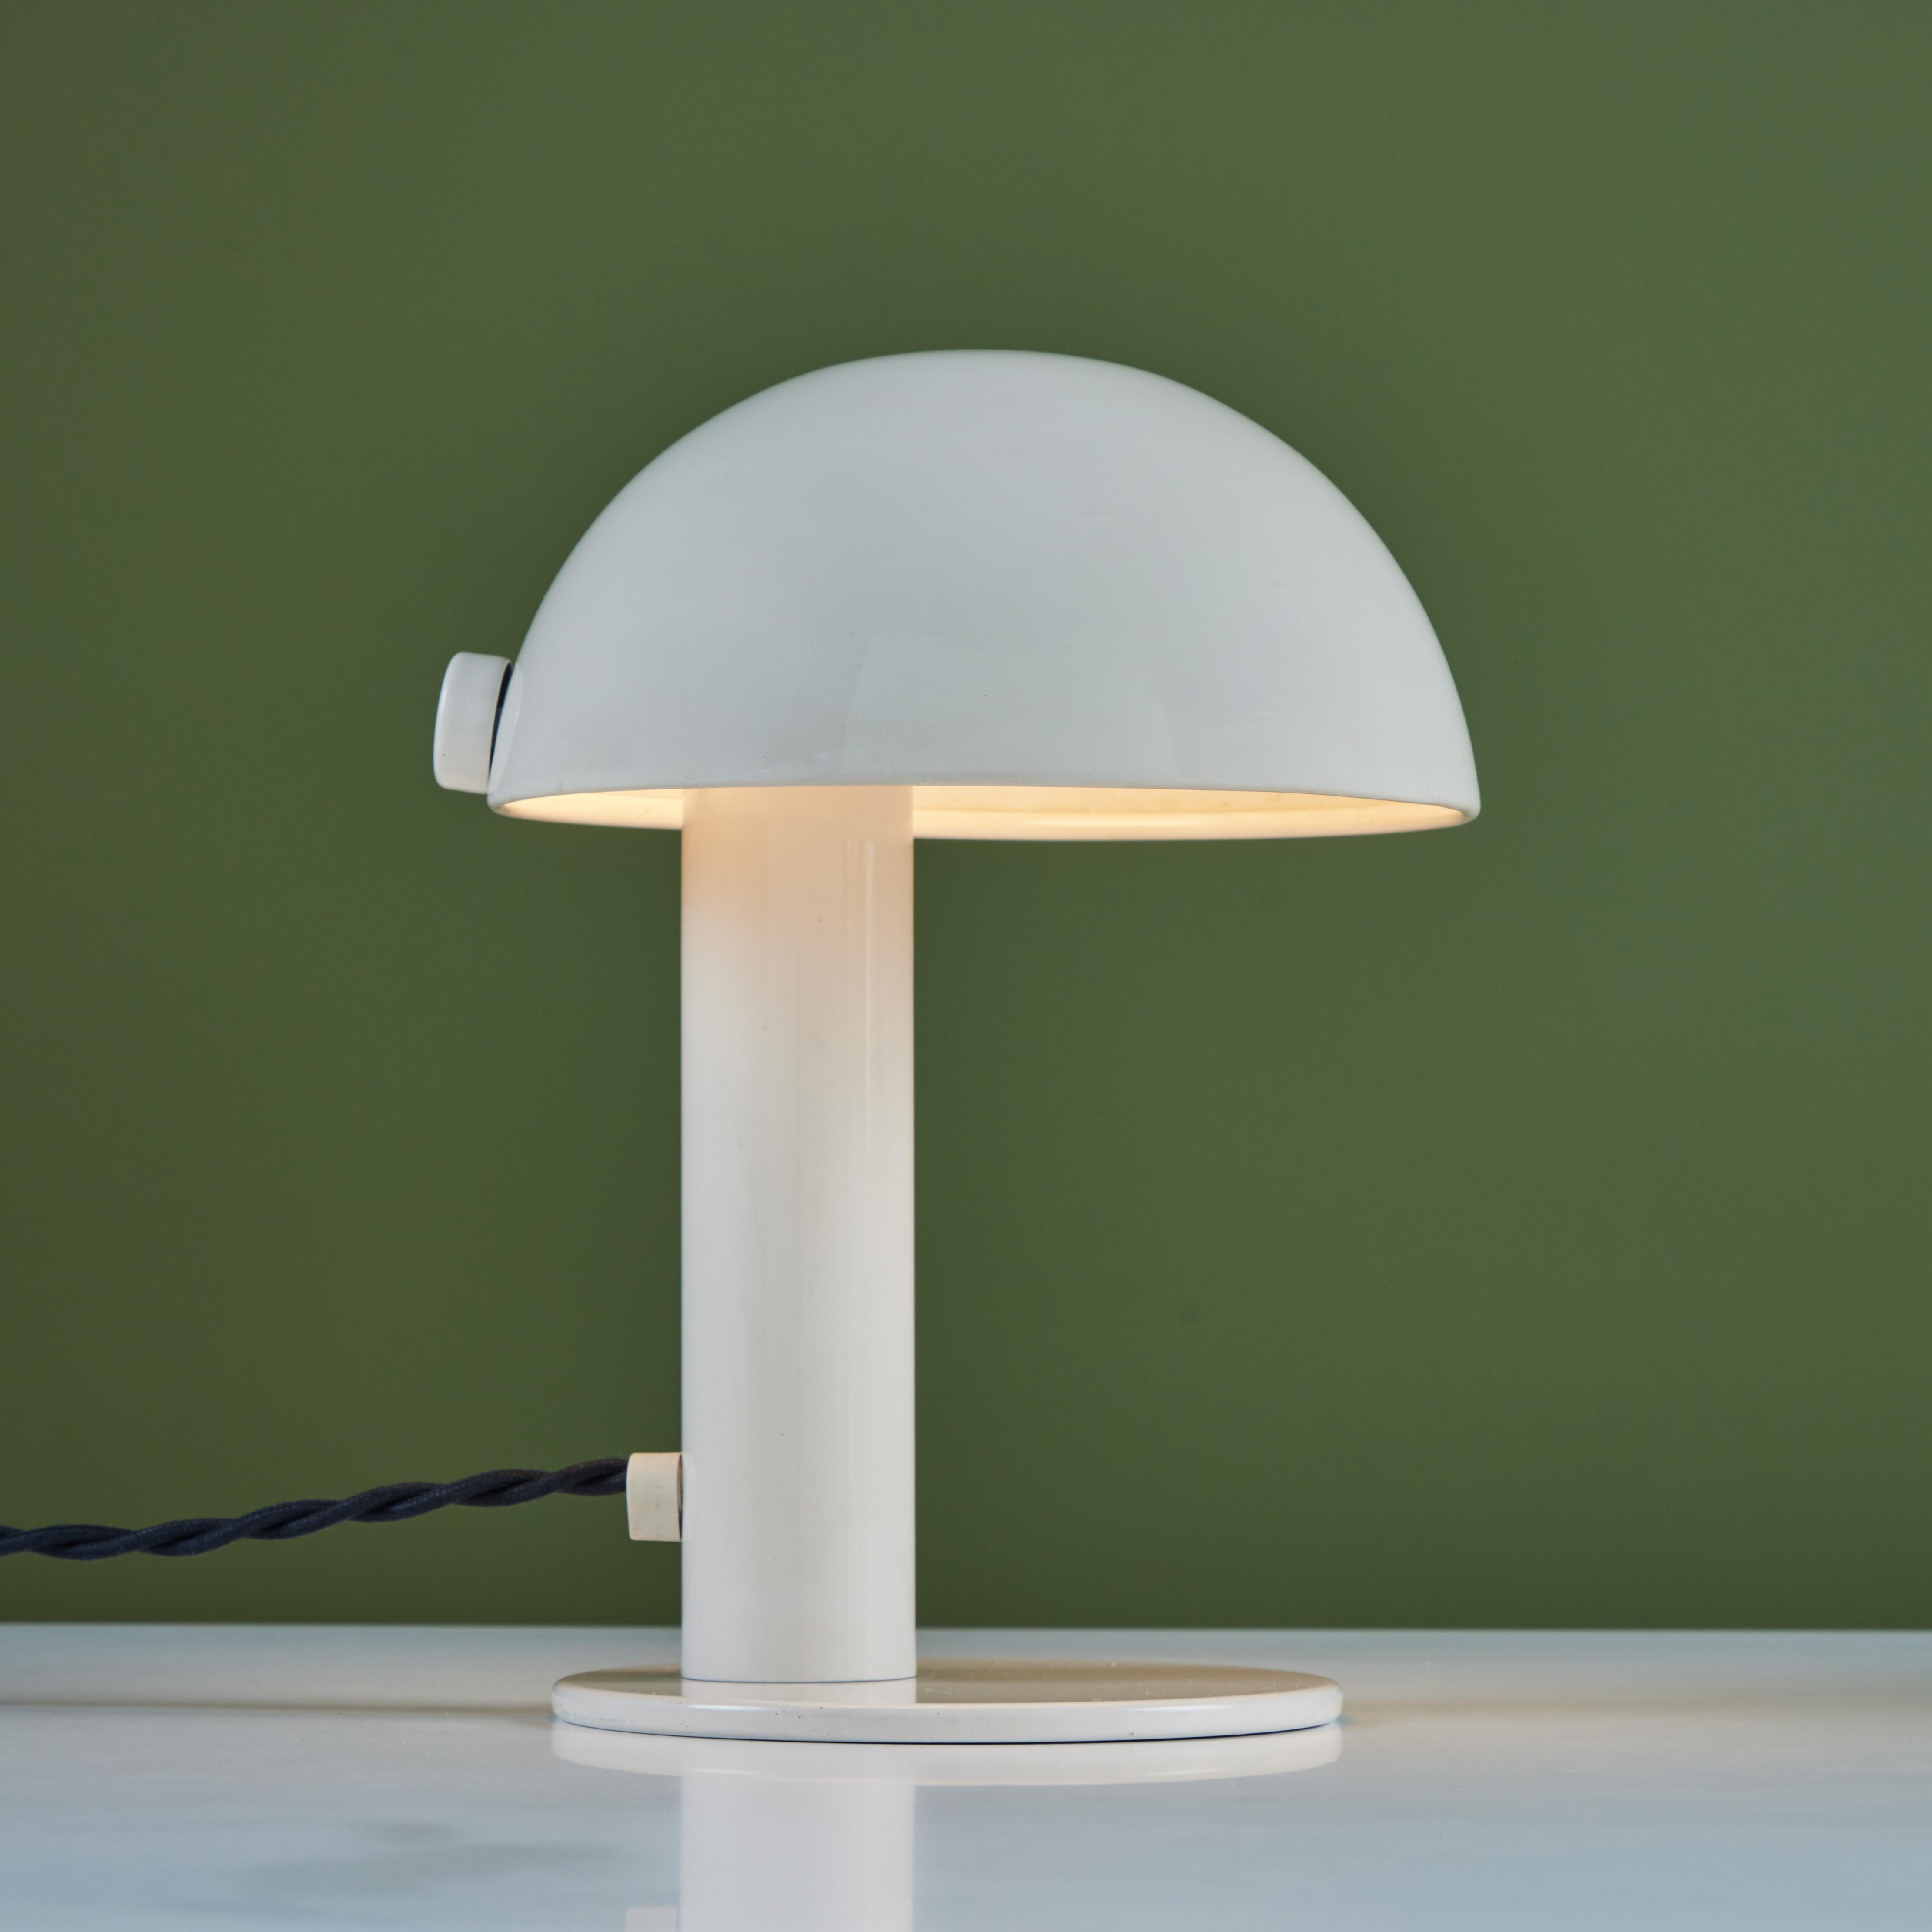 Petite table lamp with mushroom lampshade in cream-enameled metal. A round base in matching cream anchors the lamp with its tubular stem.

Dimensions
7